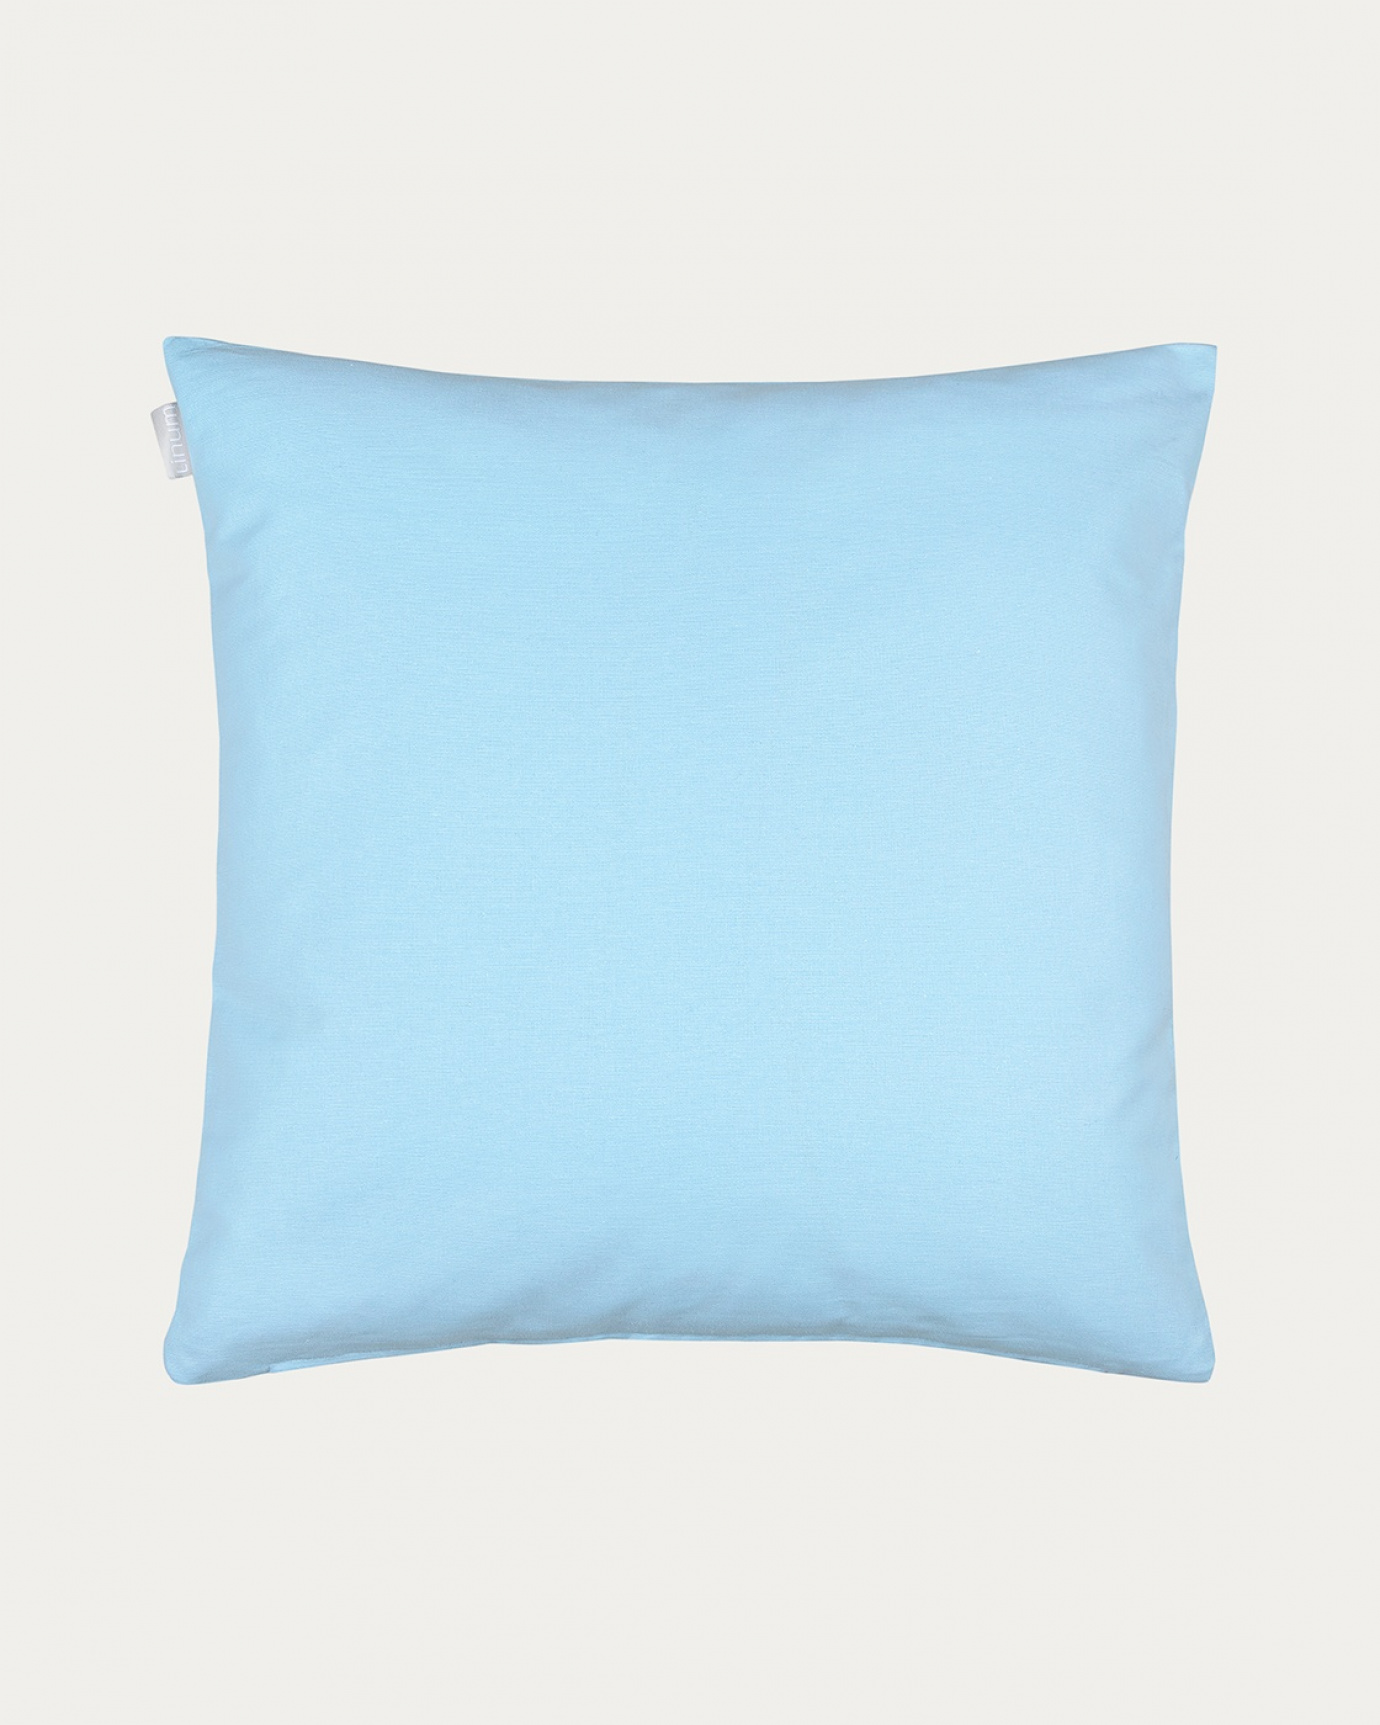 Product image light sky blue ANNABELL cushion cover made of soft cotton from LINUM DESIGN. Size 50x50 cm.